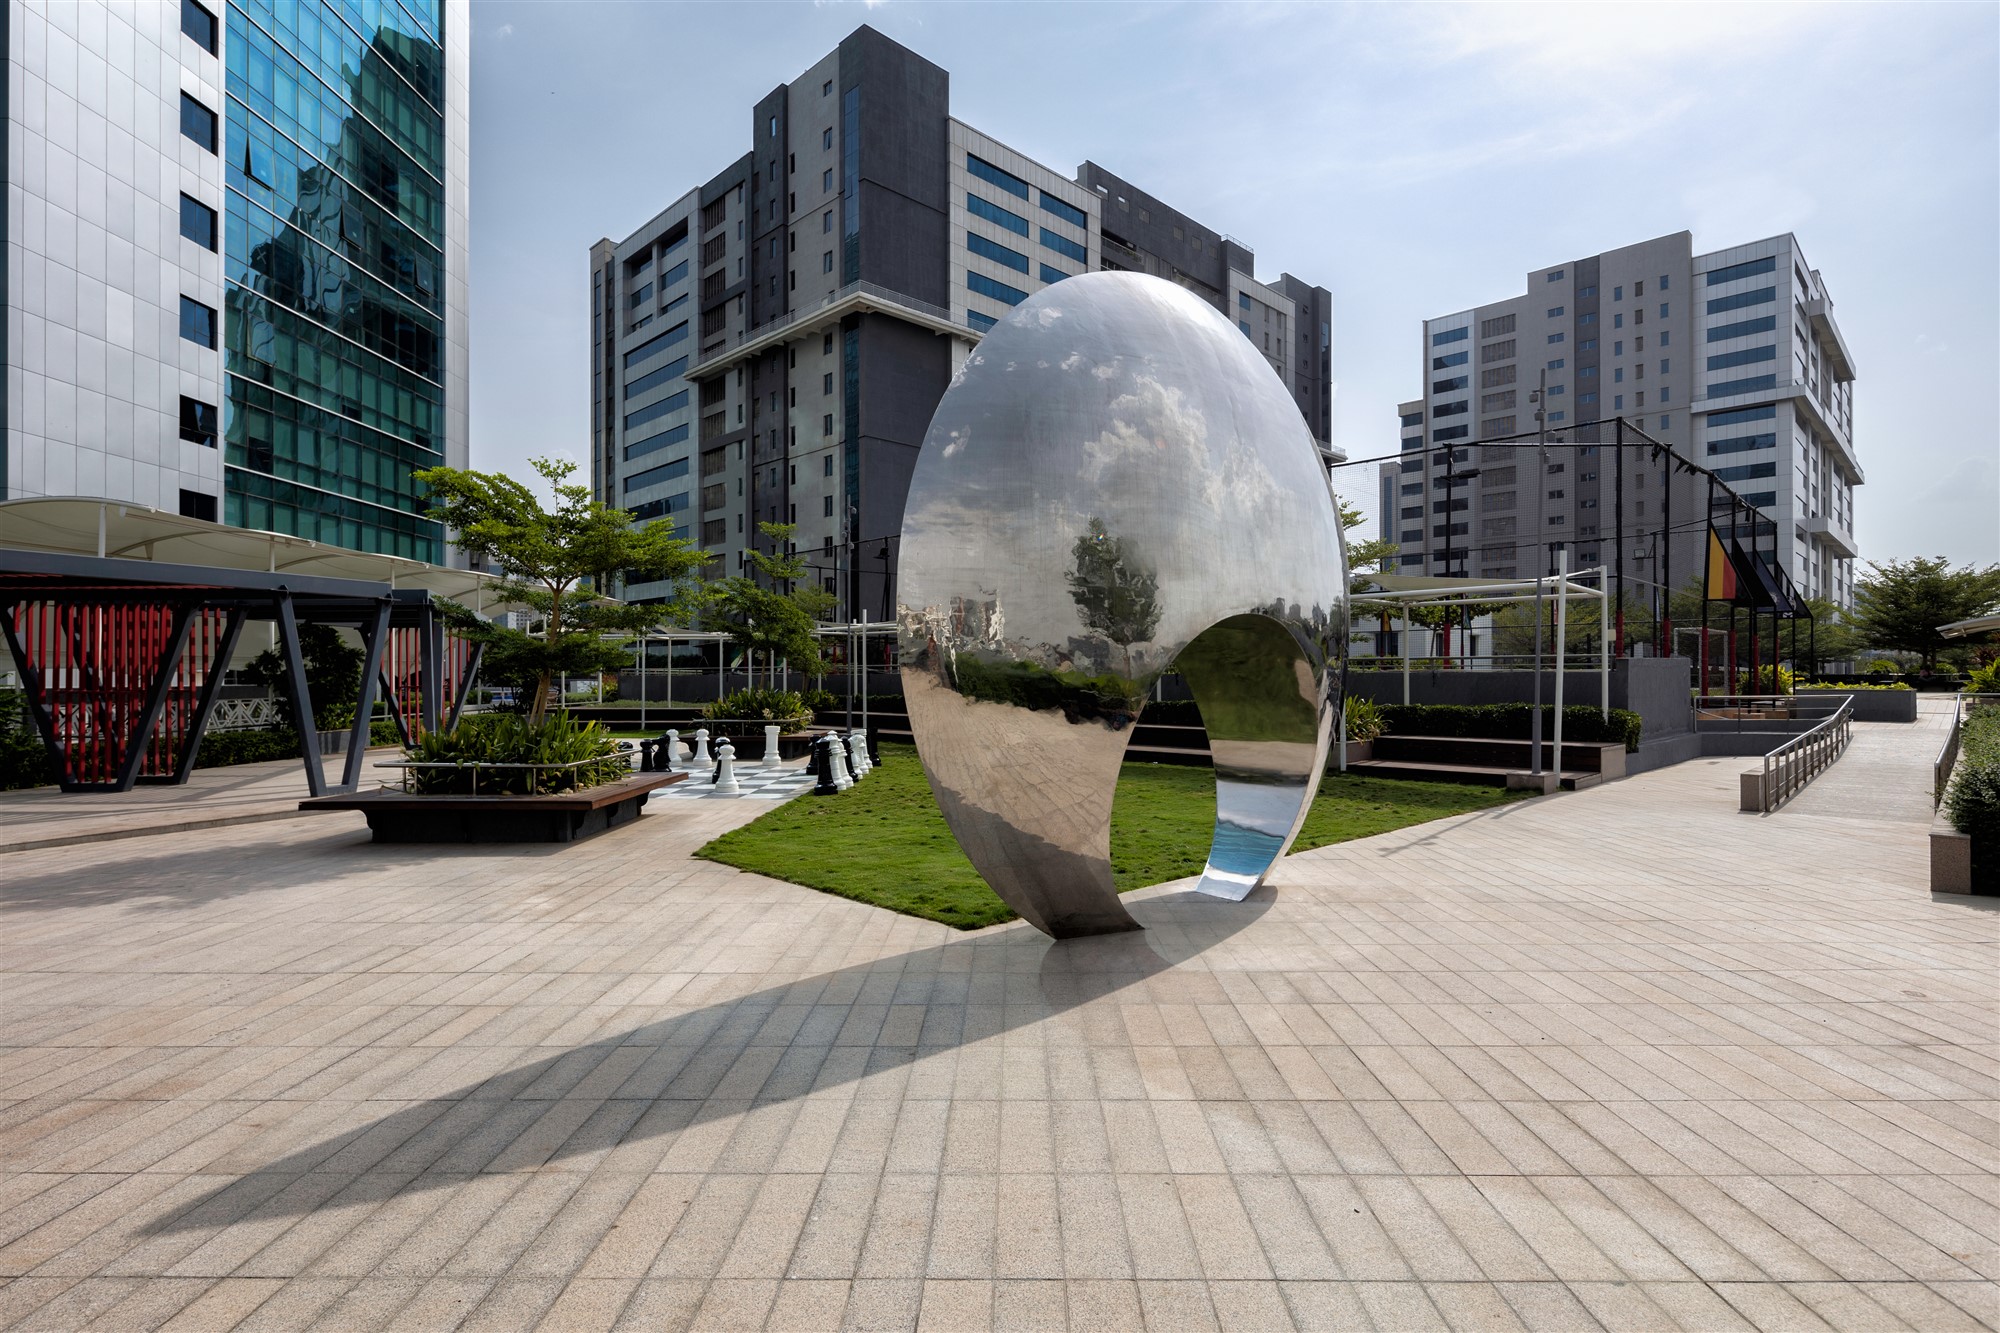 Impulsion Refelective Stainless Steel Sculpture